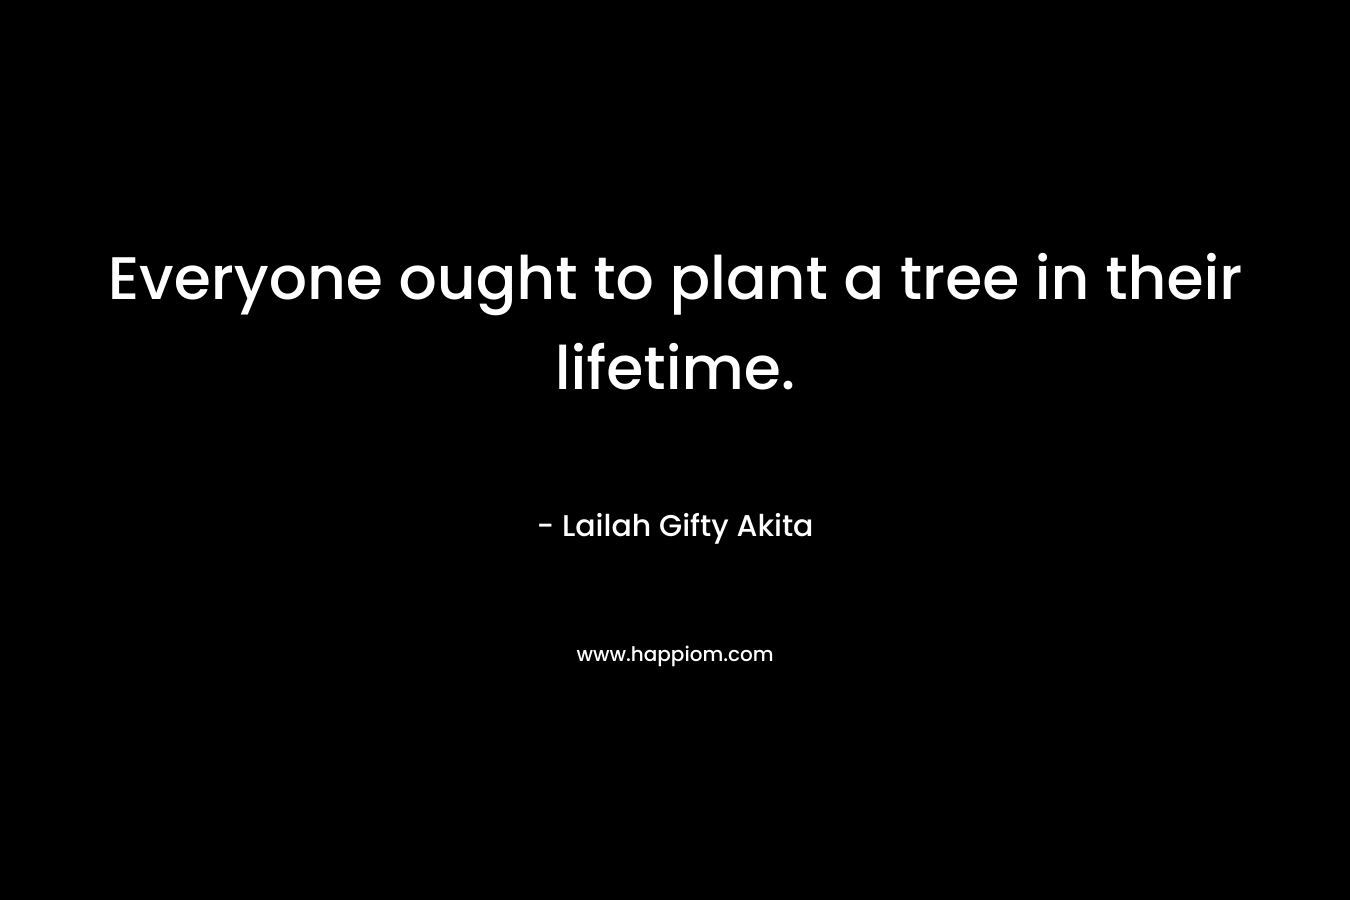 Everyone ought to plant a tree in their lifetime.